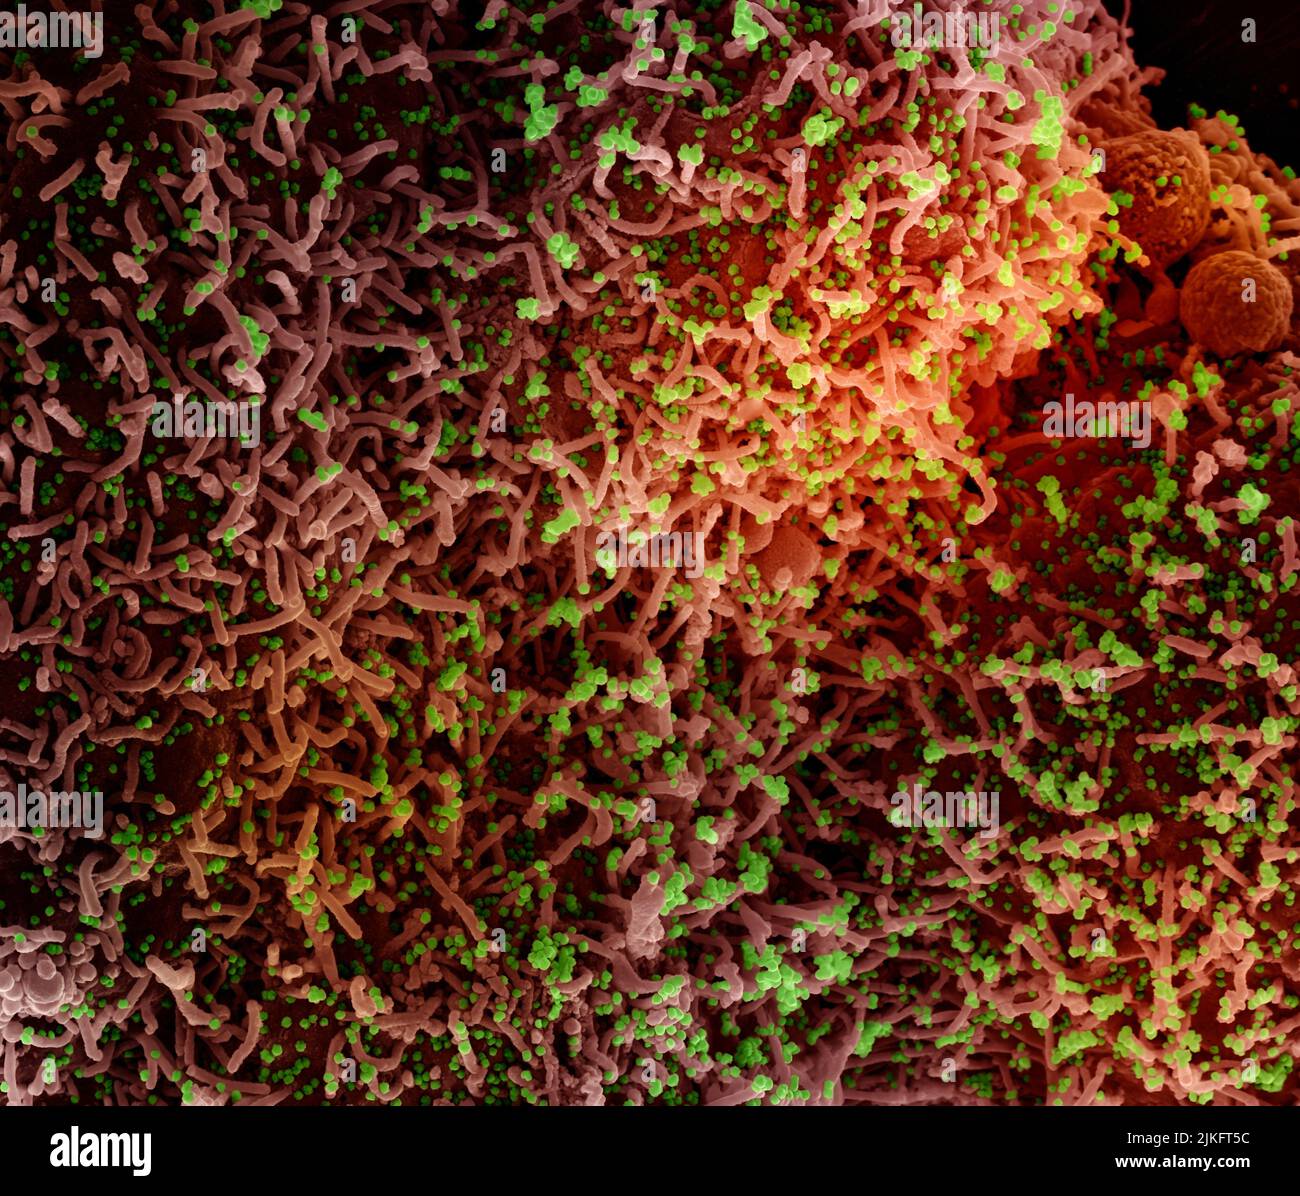 Colorized scanning electron micrograph of a cell infected with a variant strain of SARS-CoV-2 virus particles, isolated from a patient sample. Image requested from the NIAID Integrated Research Facility (IRF) in Fort Detrick, Maryland. Credit: NIAID Stock Photo